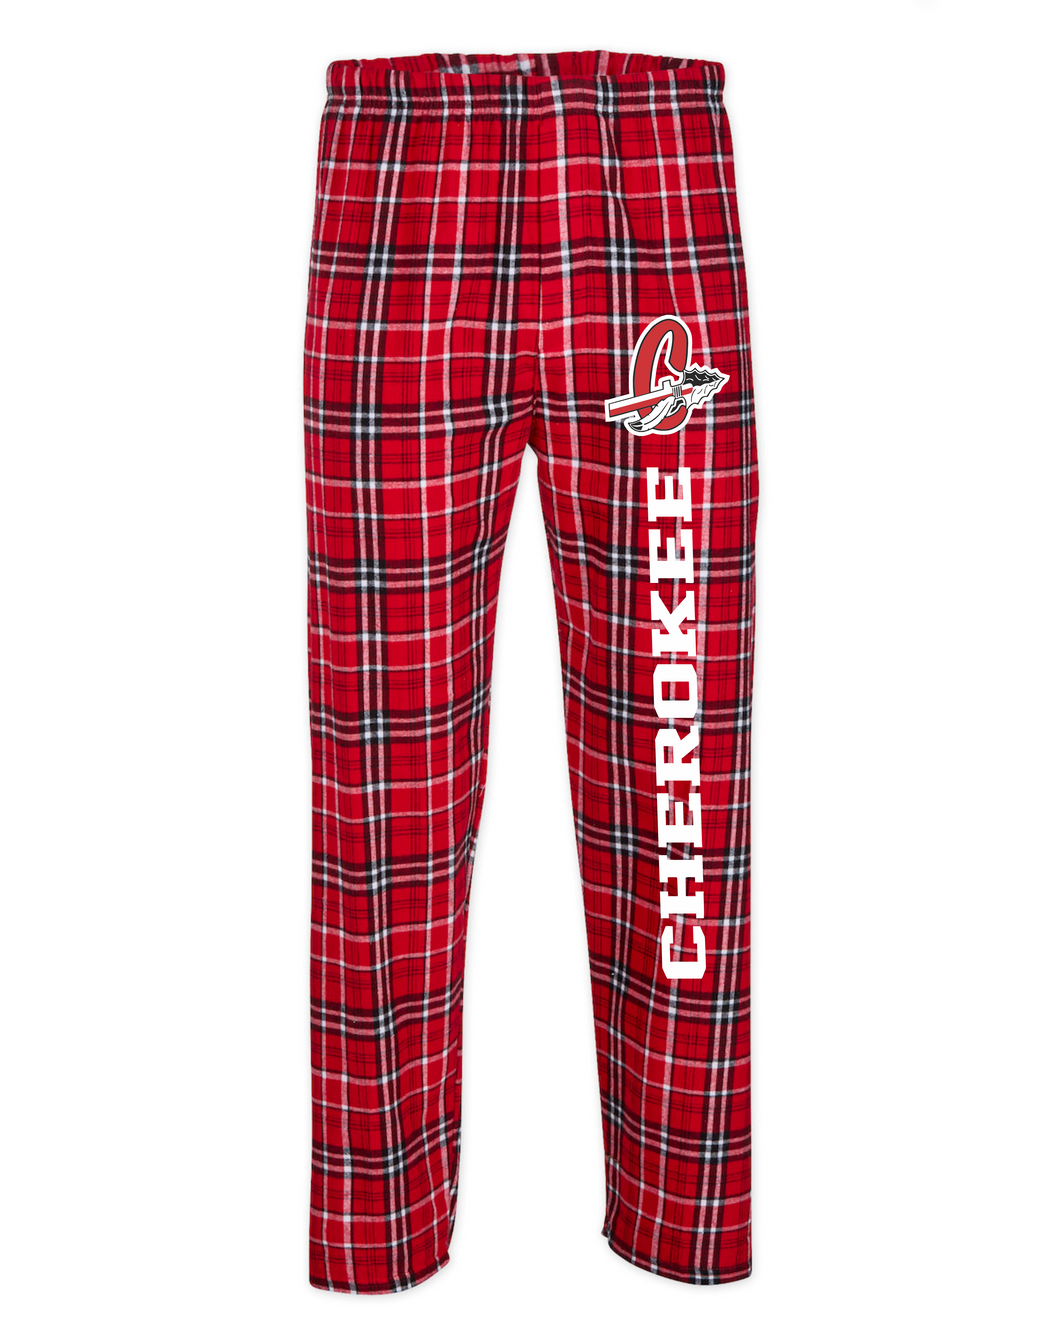 CHS-WRES-722-6 - Boxercraft Men's Harley Flannel Pant with Pockets - Cherokee C Logo